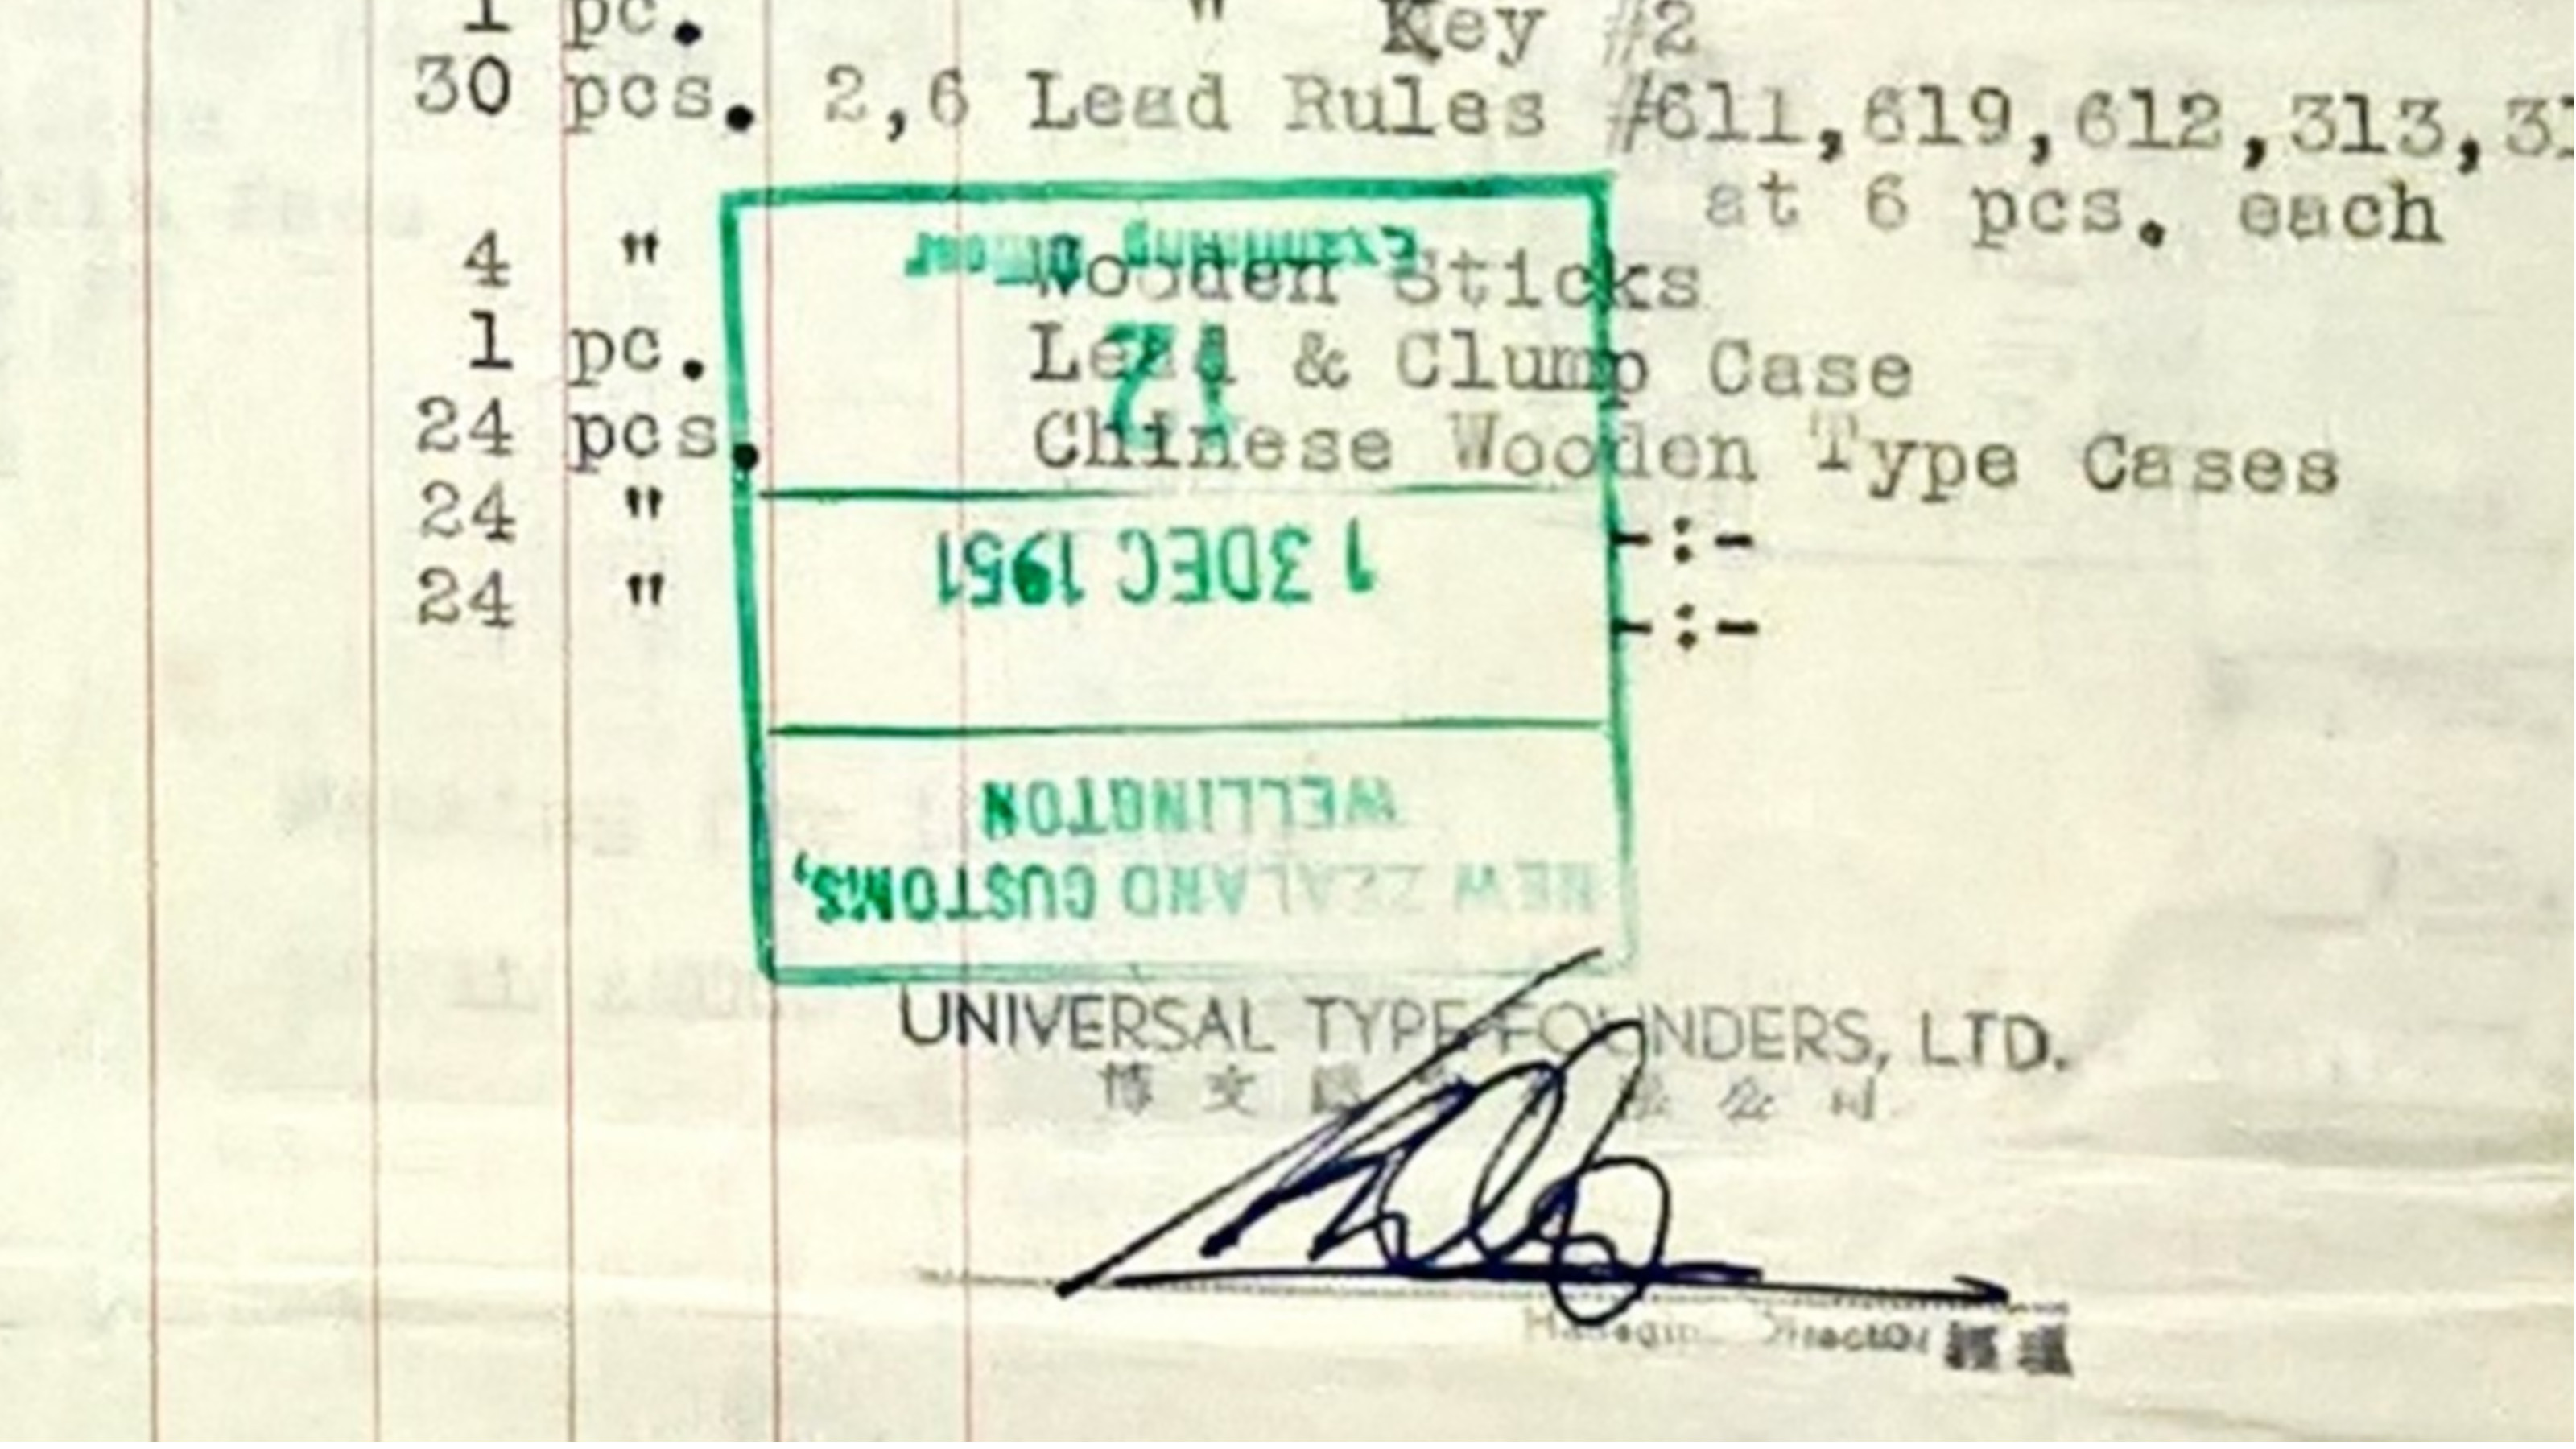 detail of invoice showing NZ Customs entry stamp